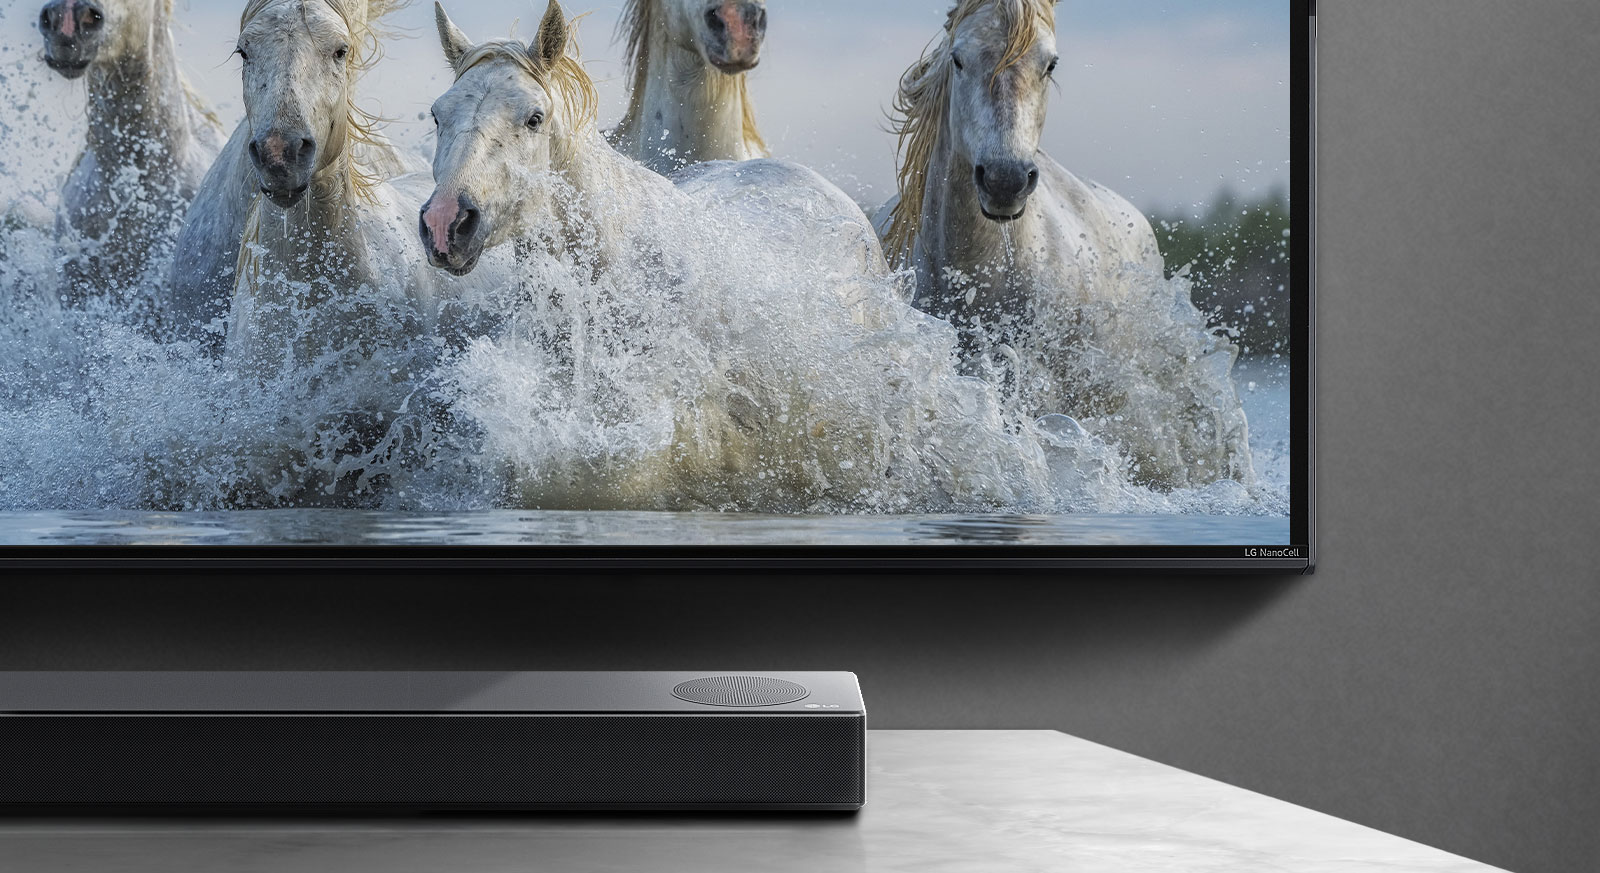 Bottom half of the screen and bottom half of the soundbar The TV screen shows white horses galloping over water.